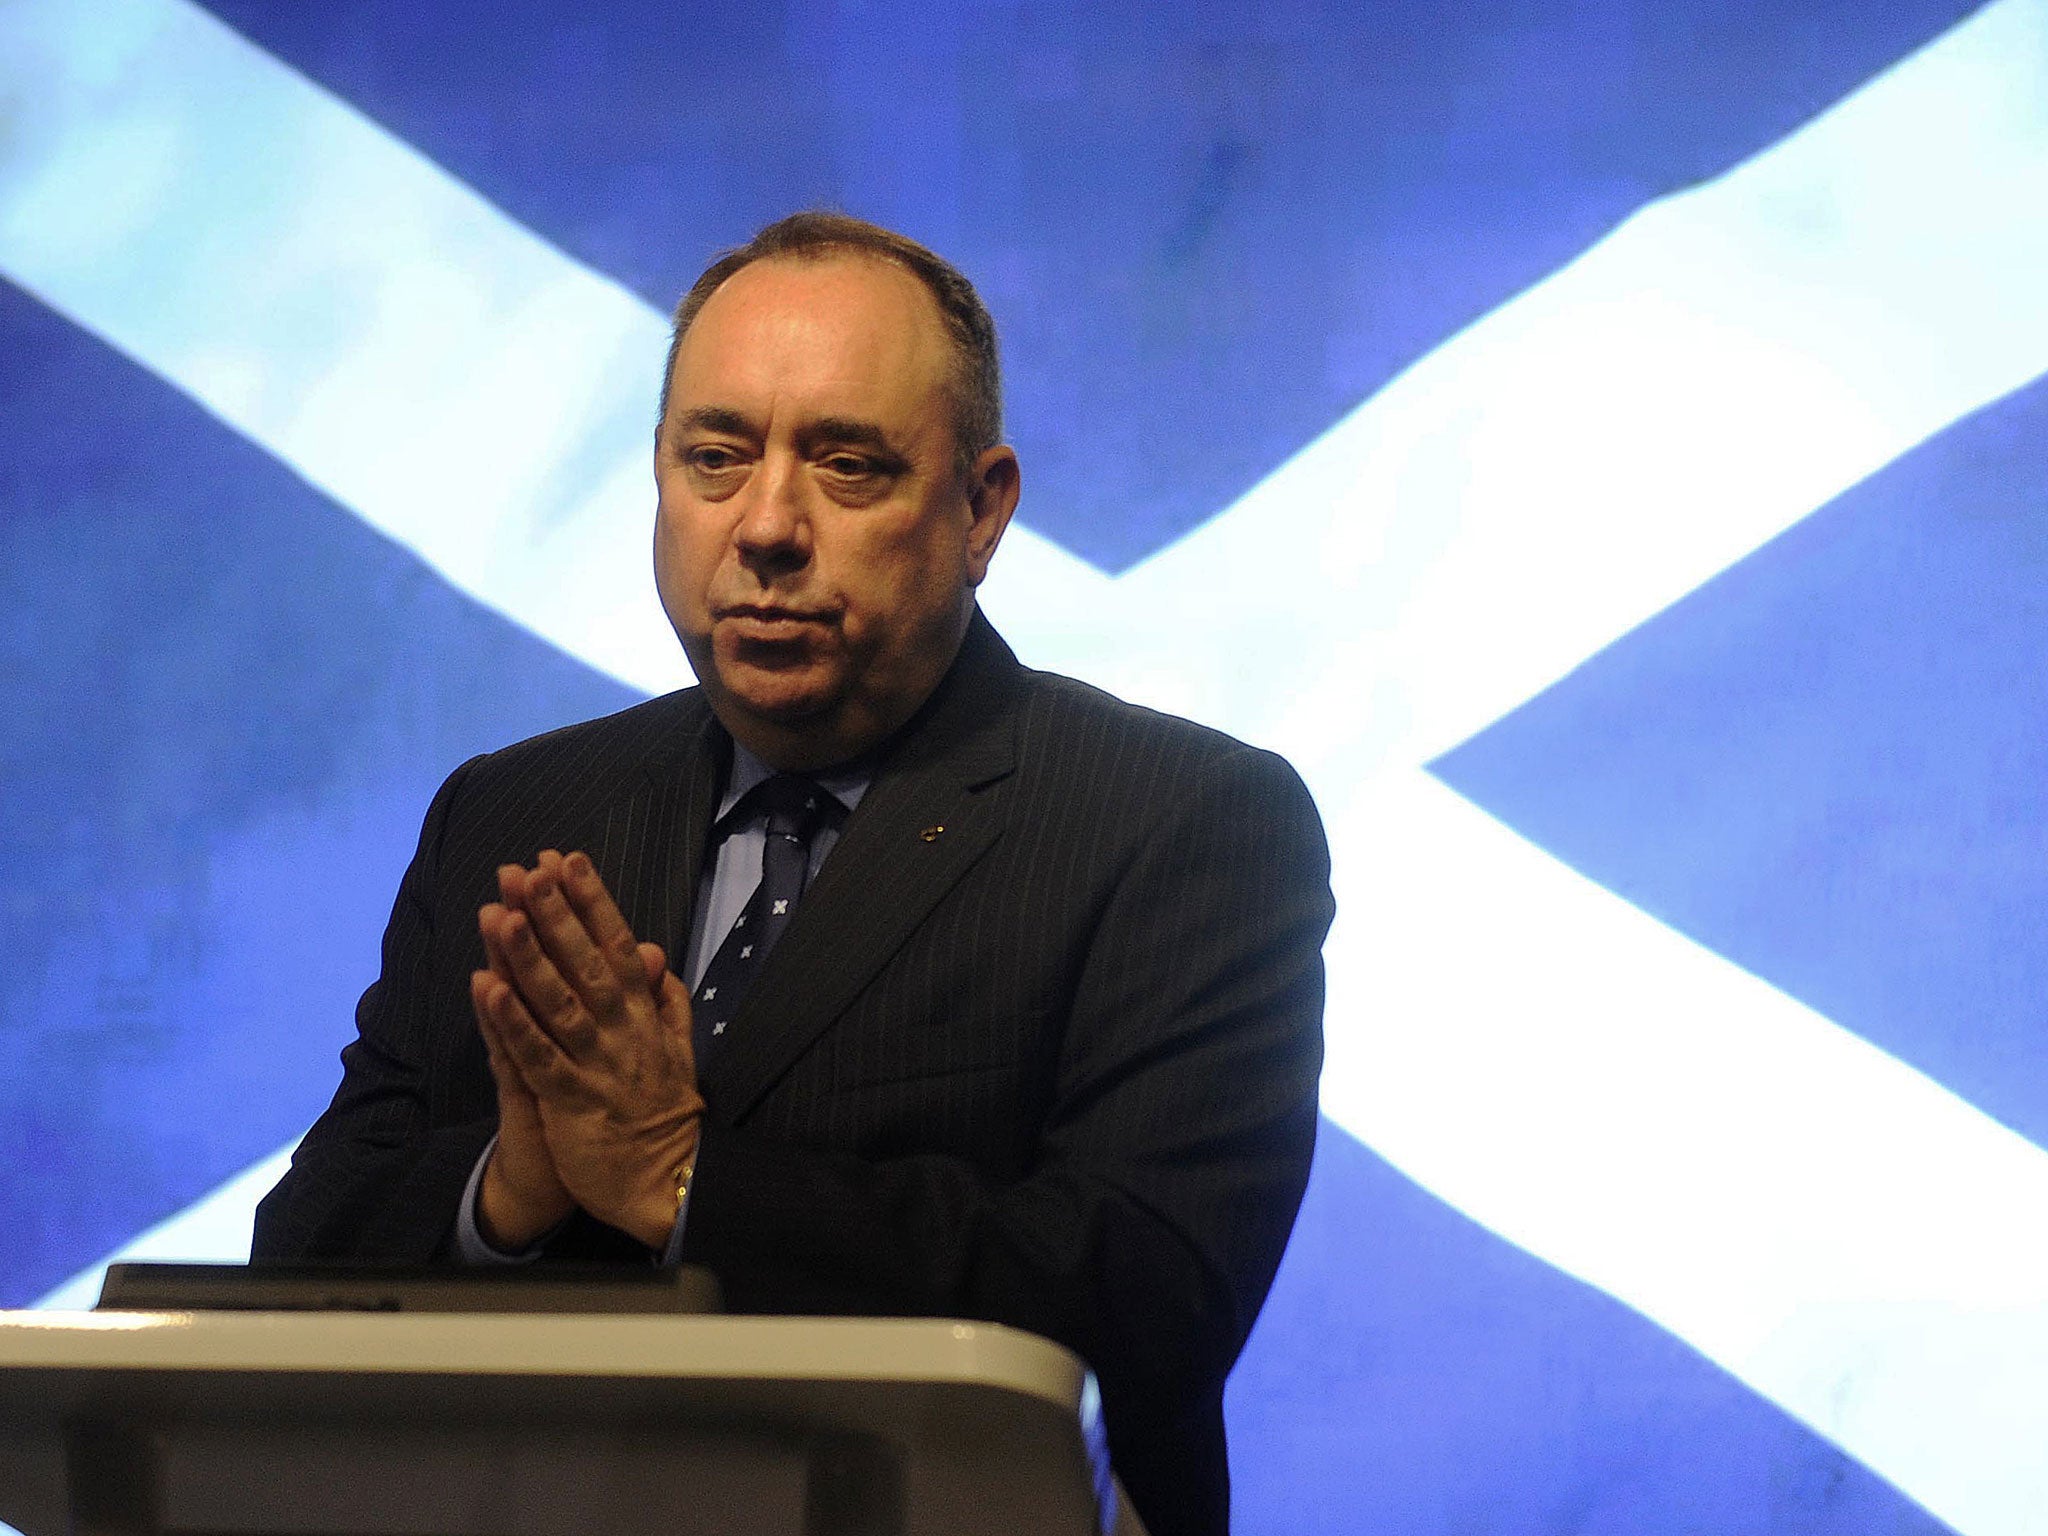 Scotland's First Minister Alex Salmond gestures during a press conference in St Andrews House in Edinburgh on October 15, 2012 after signing an agreement for a referendum on Scottish independence with the British prime minister.